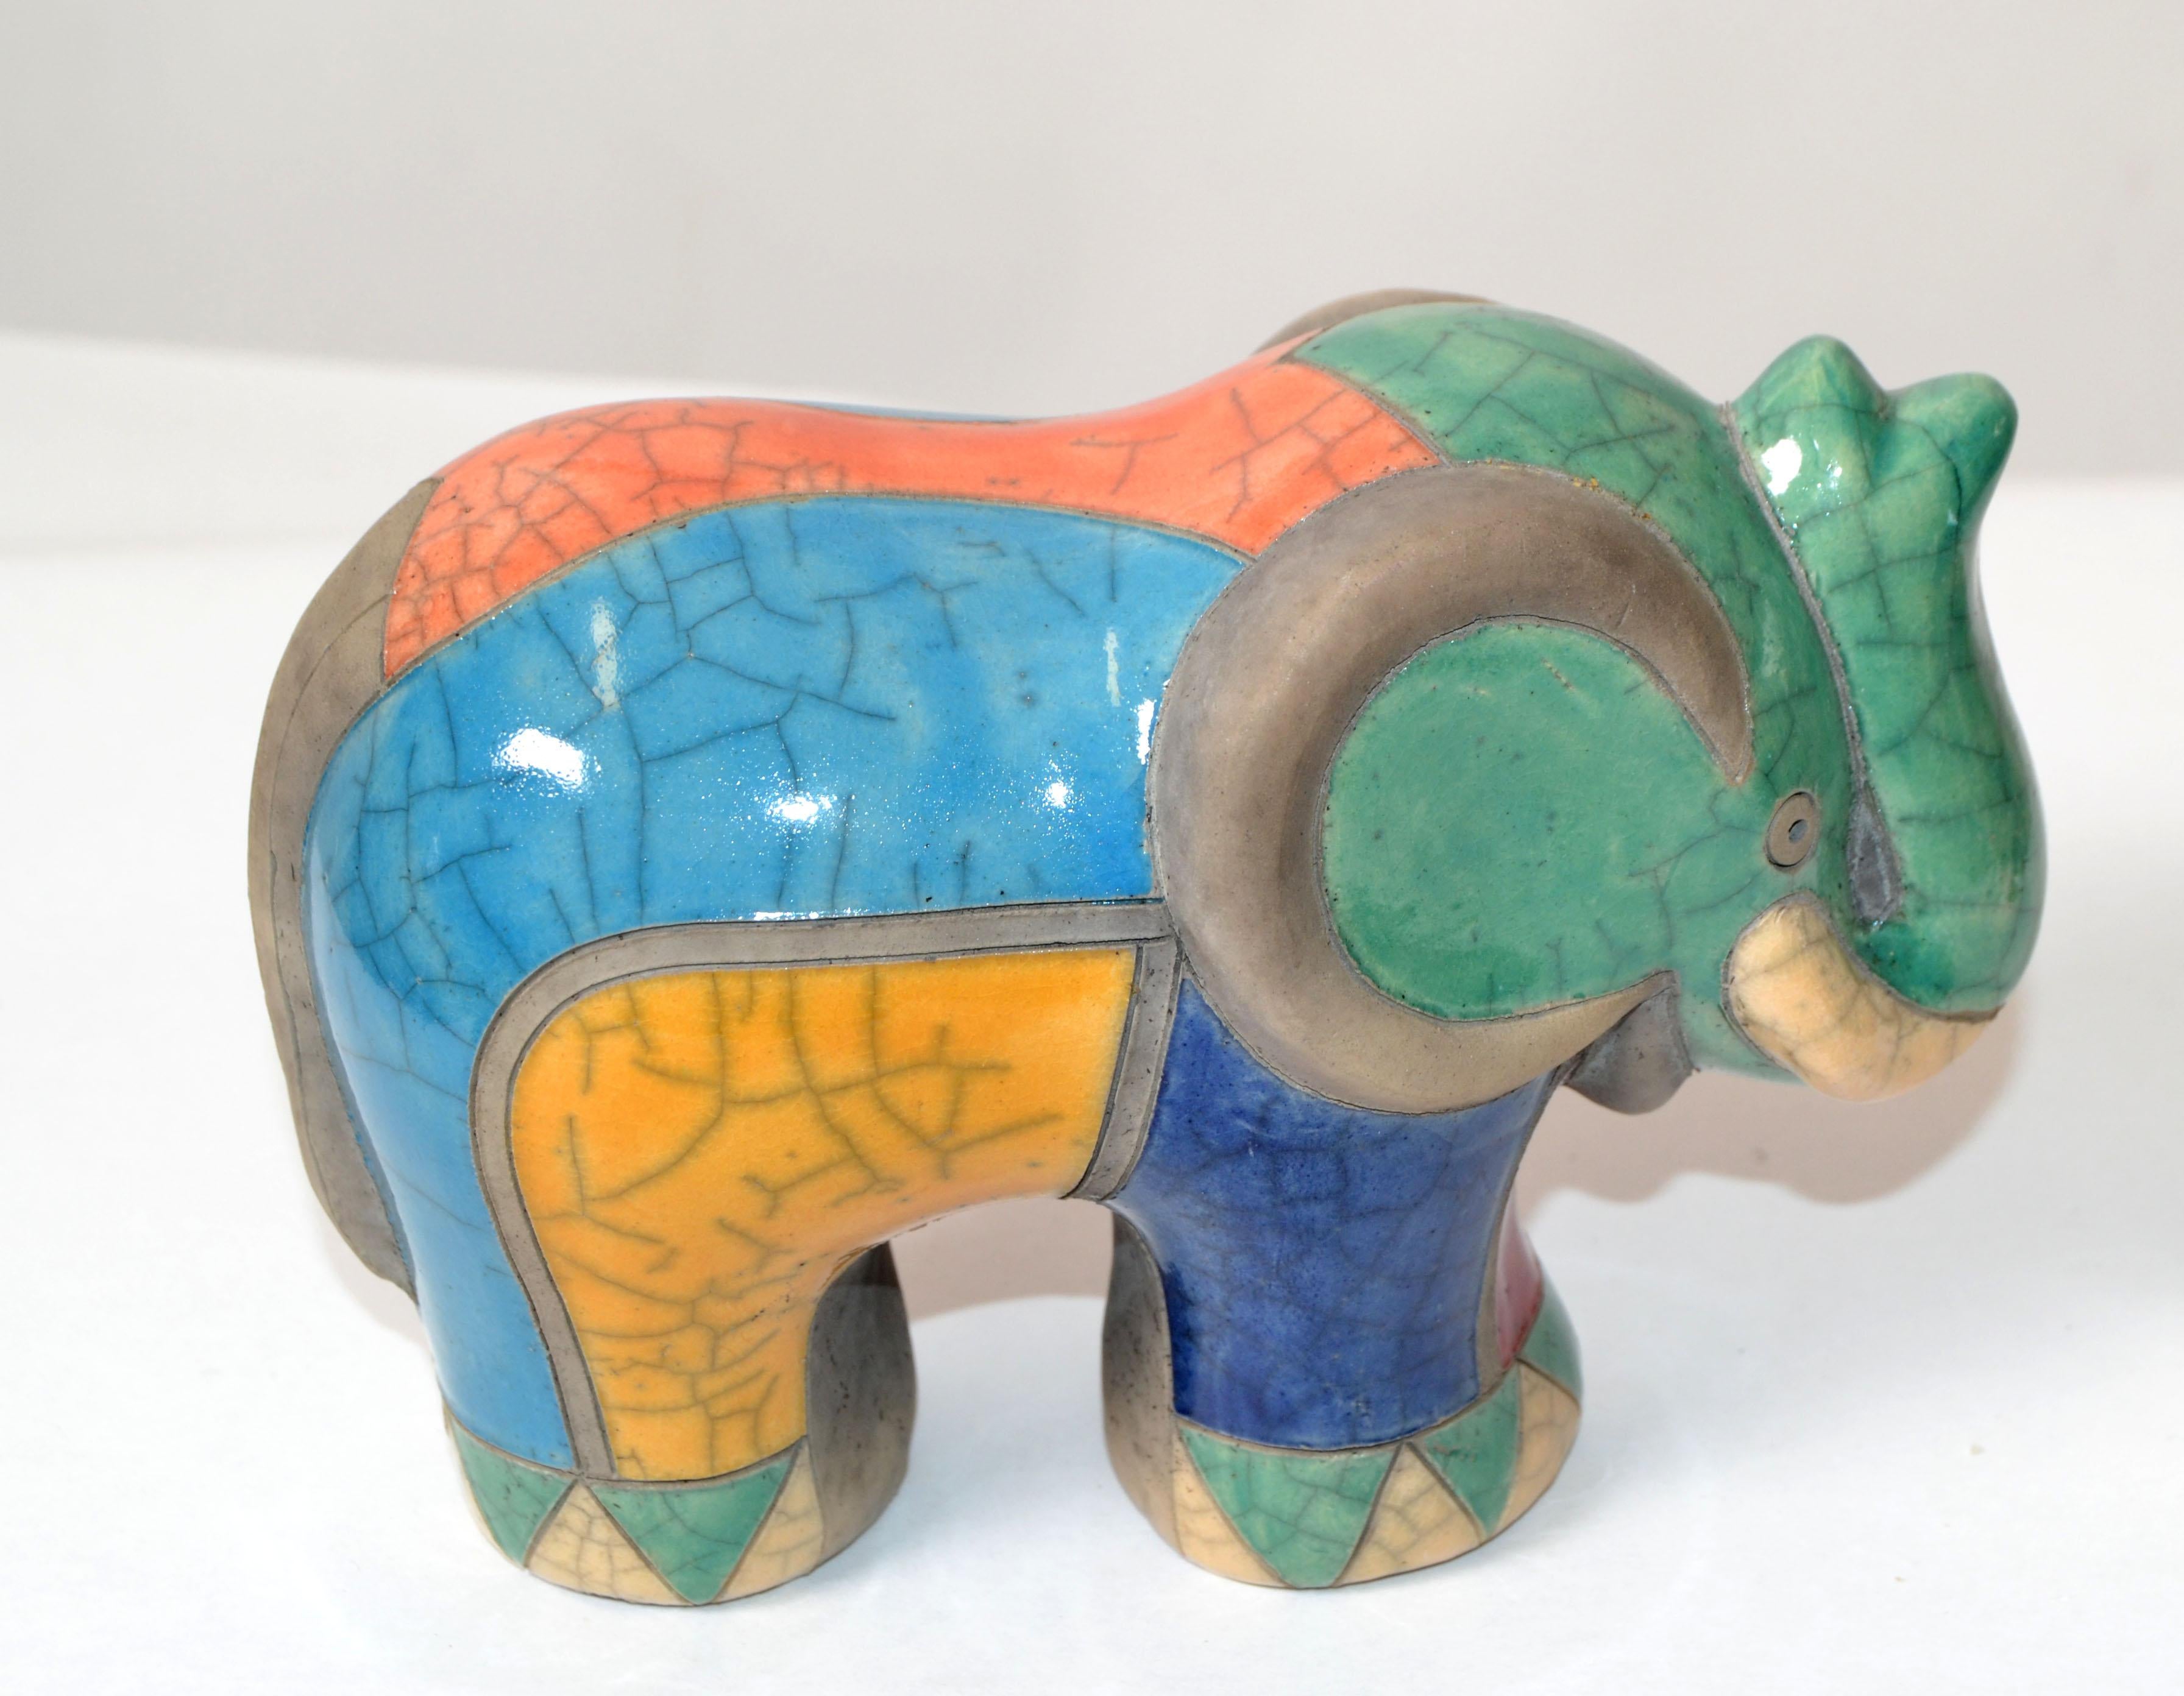 Luca CL Marked Colorful Ceramic Elephant Sculpture Mid-Century Modern Italy 1970 For Sale 6